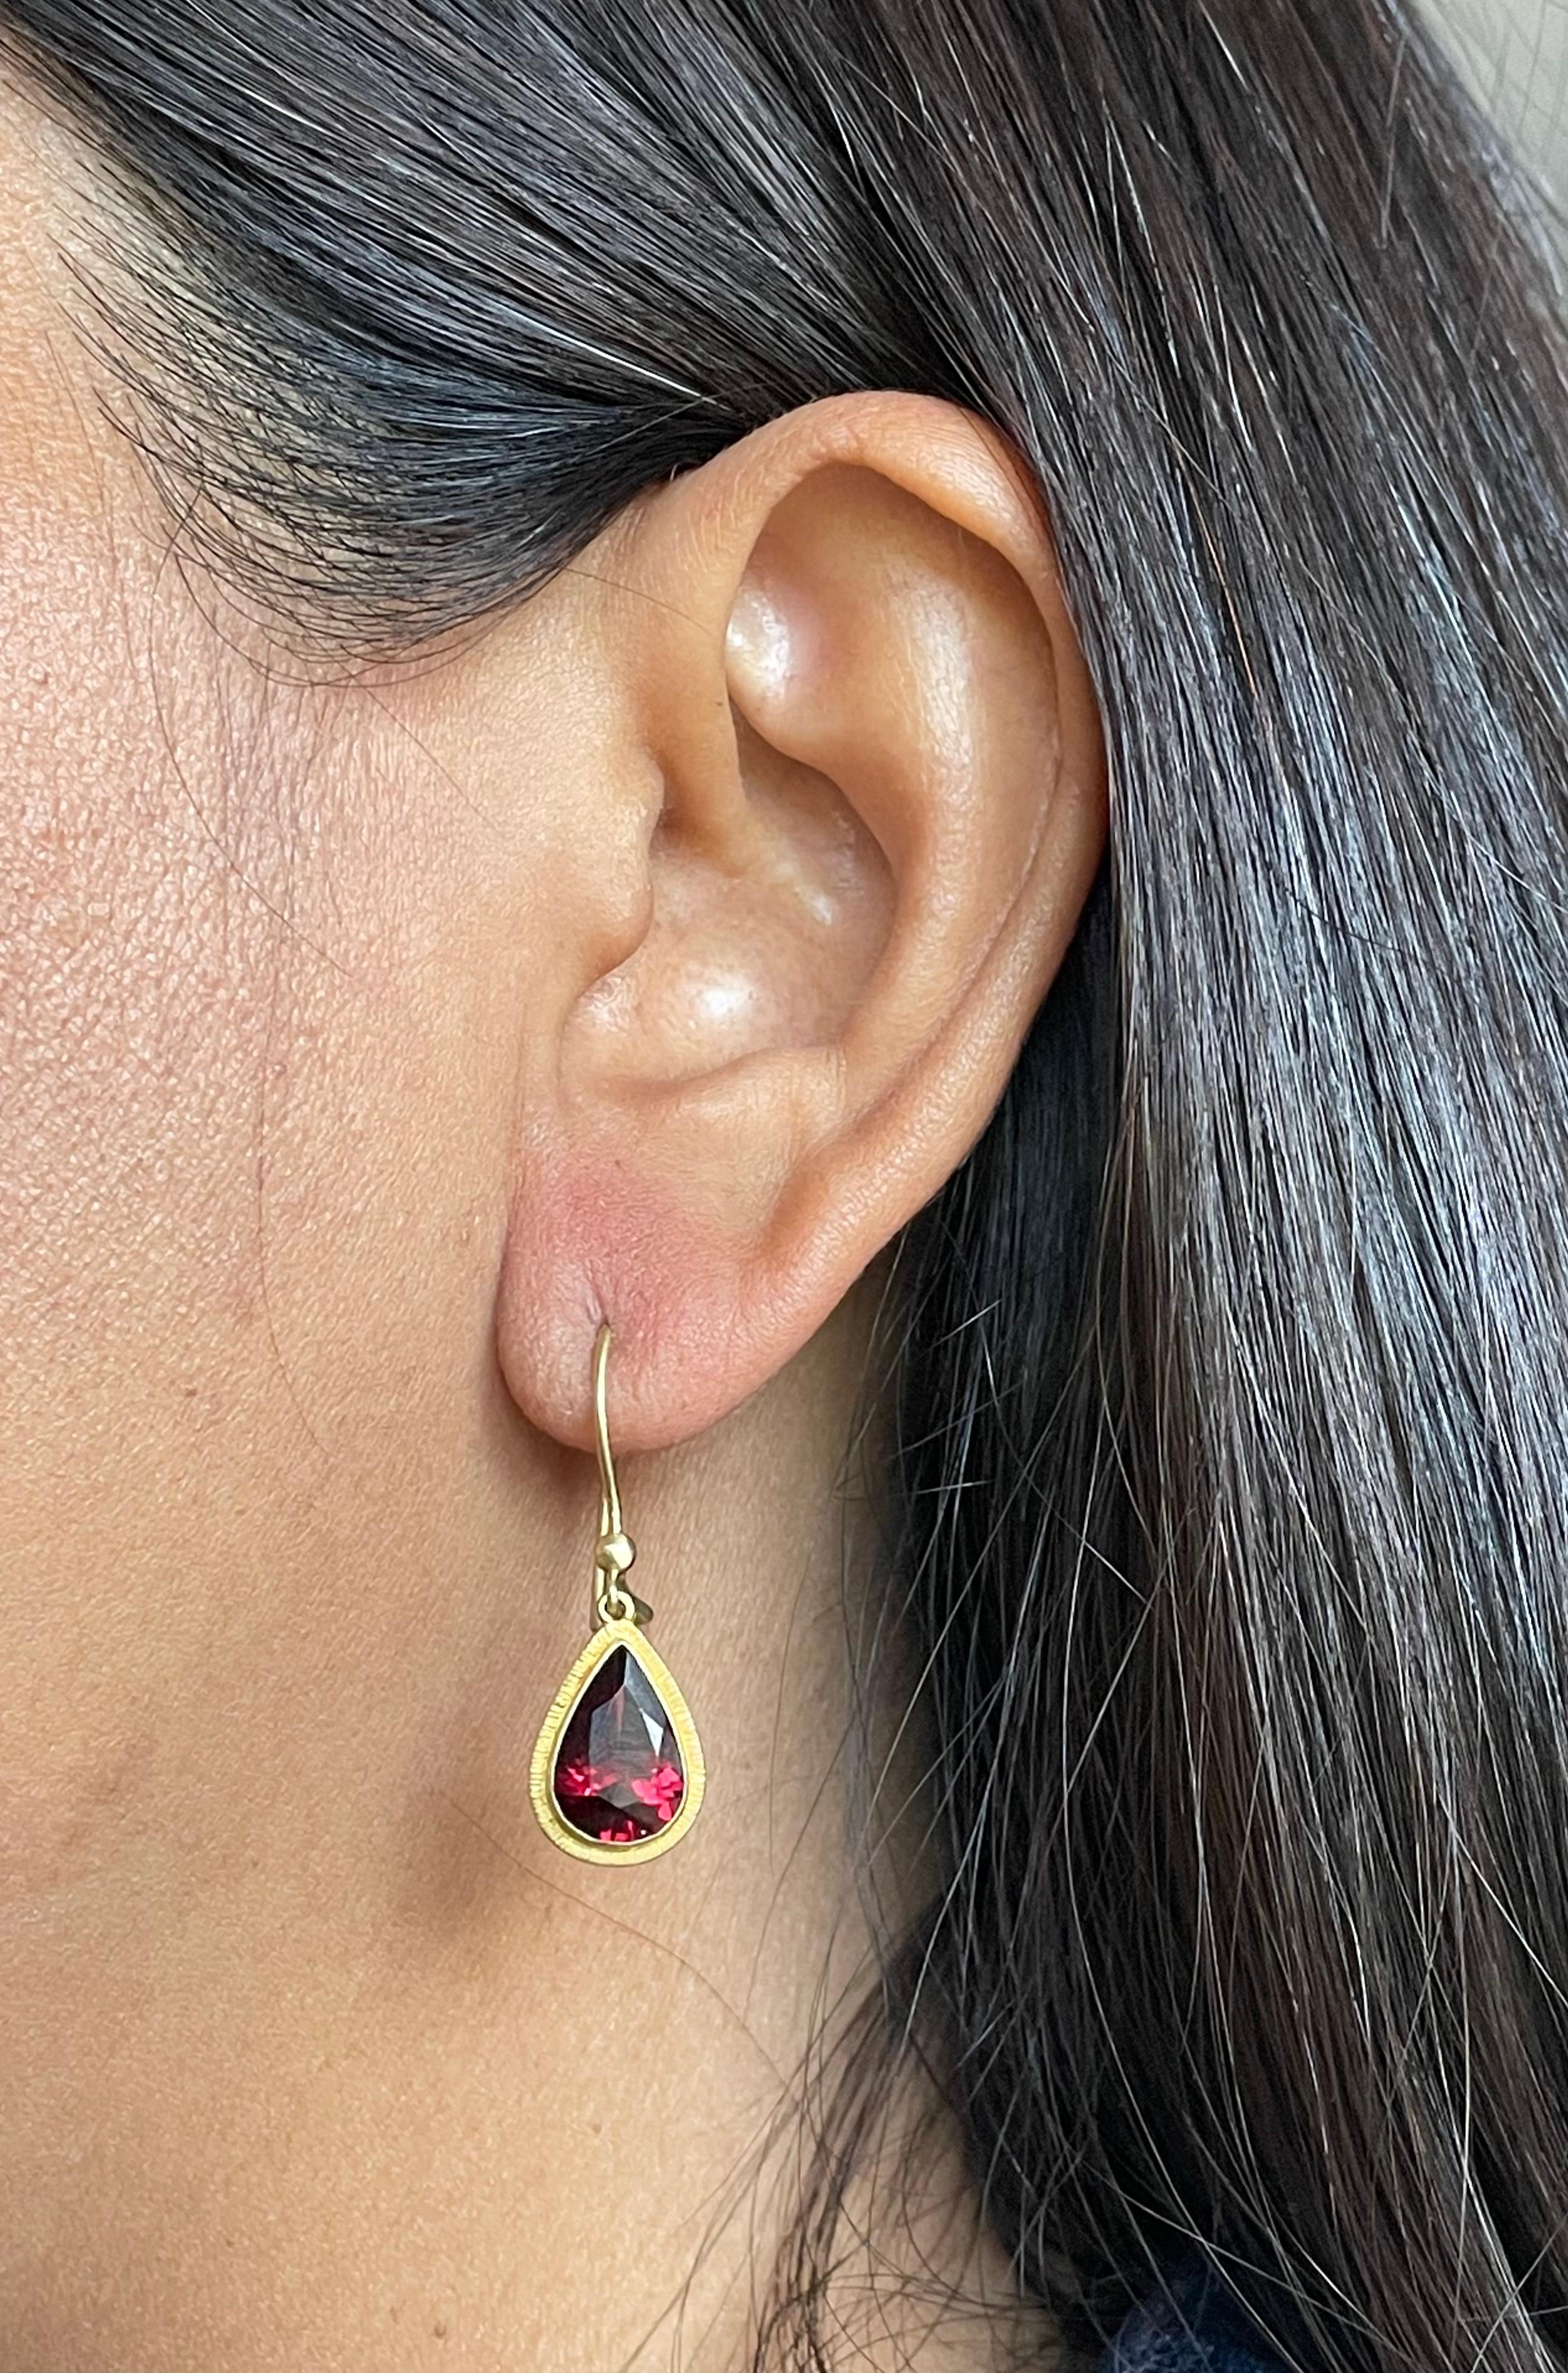 Two flashing 7 x 12 mm faceted pear shaped garnets are surrounded by line textured 18K gold bezels and suspended below small half round balls on safety clasp wires, in this simple and elegant design sure to please.  The brilliant red of the garnets